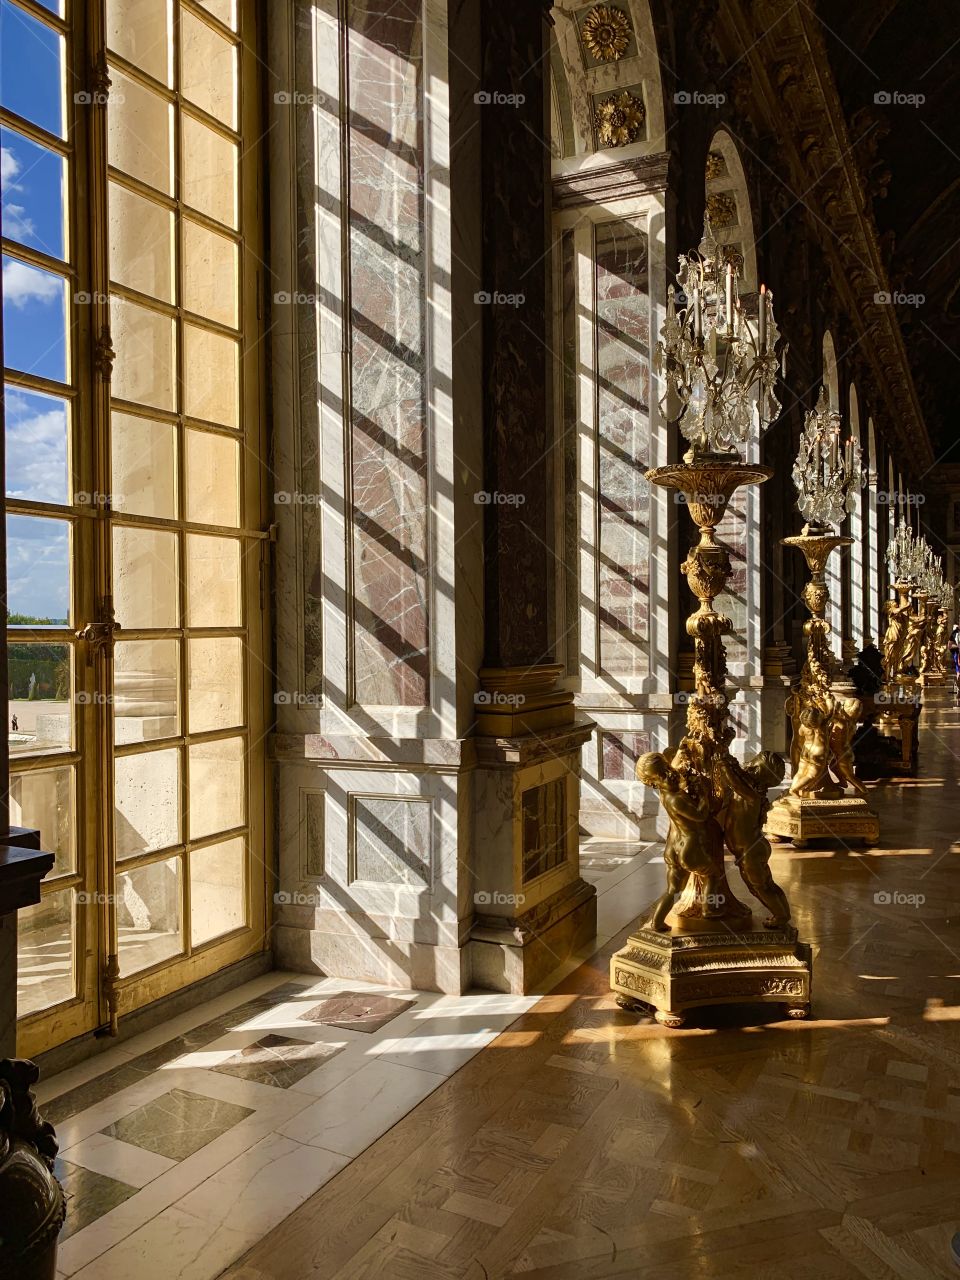 Hall of Mirrors in Chateau de Versailles, France